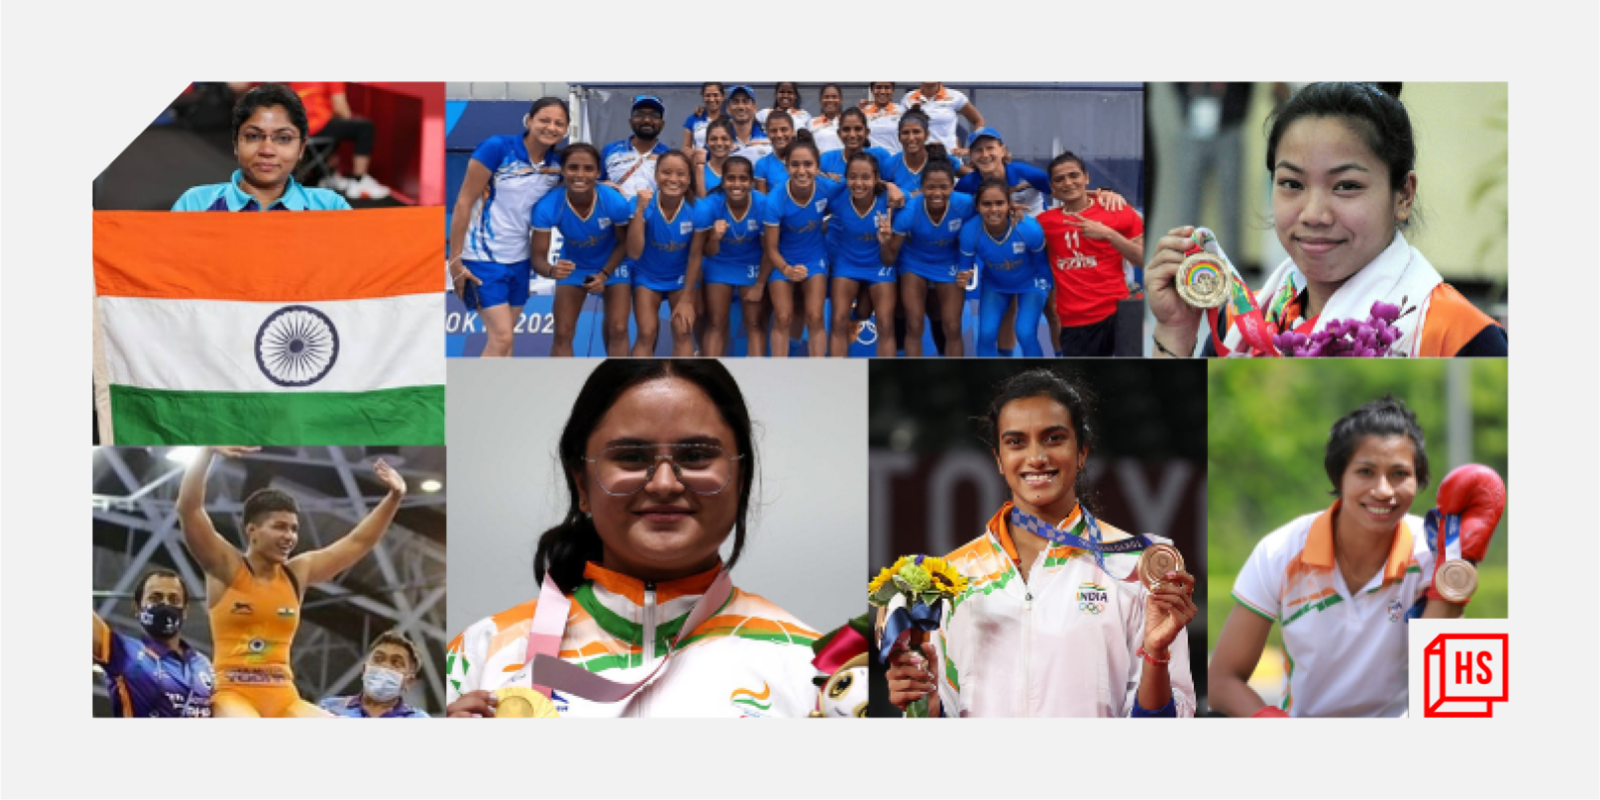 [Year in Review 2021] Meet the women sportspersons who made India proud this year and set the bar high